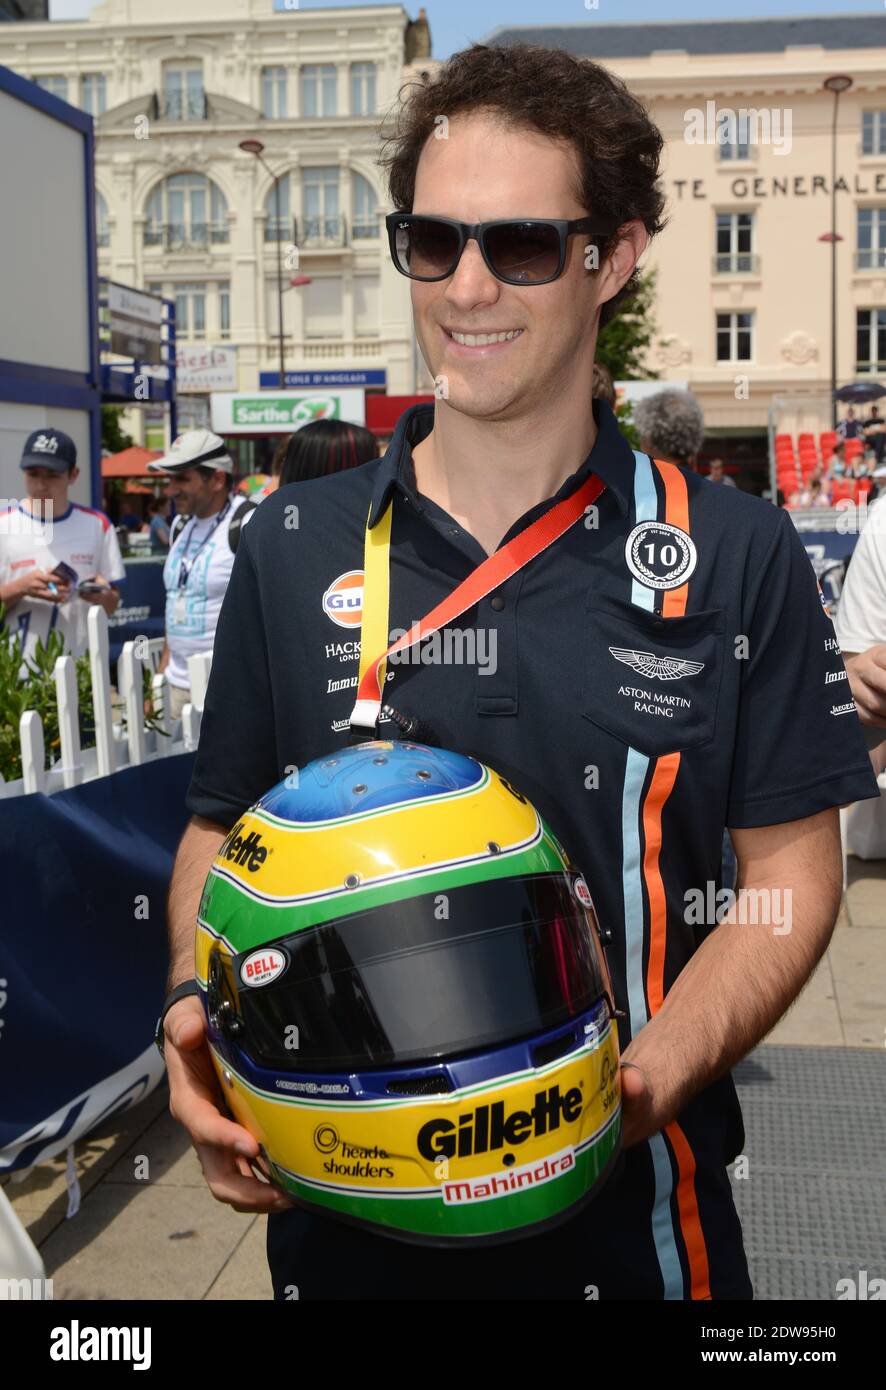 Brazilian driver Bruno Senna of Aston Martin V8 Vantage Lmgte Pro Team Aston Martin Racing during the 2014 scrutineering and qualifying sessions of the 24 Hours of Le Mans from June the 8th to the 12th 2014, at Le Mans circuit, France on June 9, 2014. Photo by Guy Durand/ABACAPRESS.COM Stock Photo